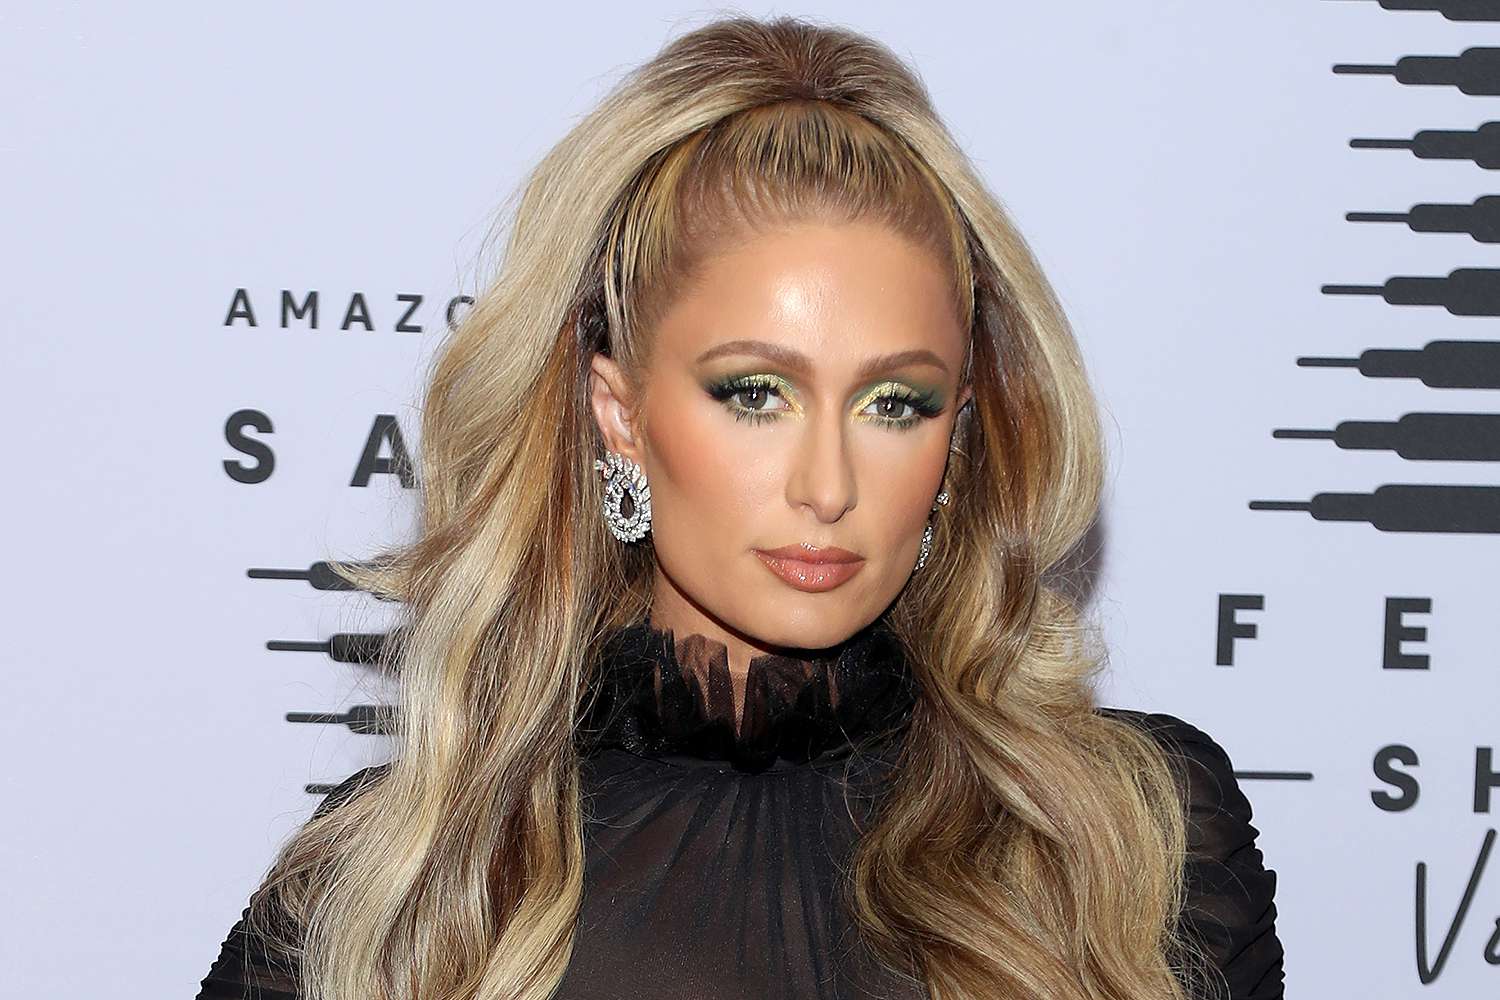 Paris Hilton Says She Was Drugged and Raped as a Teen: 'I Just Immediately Started Feeling Dizzy'